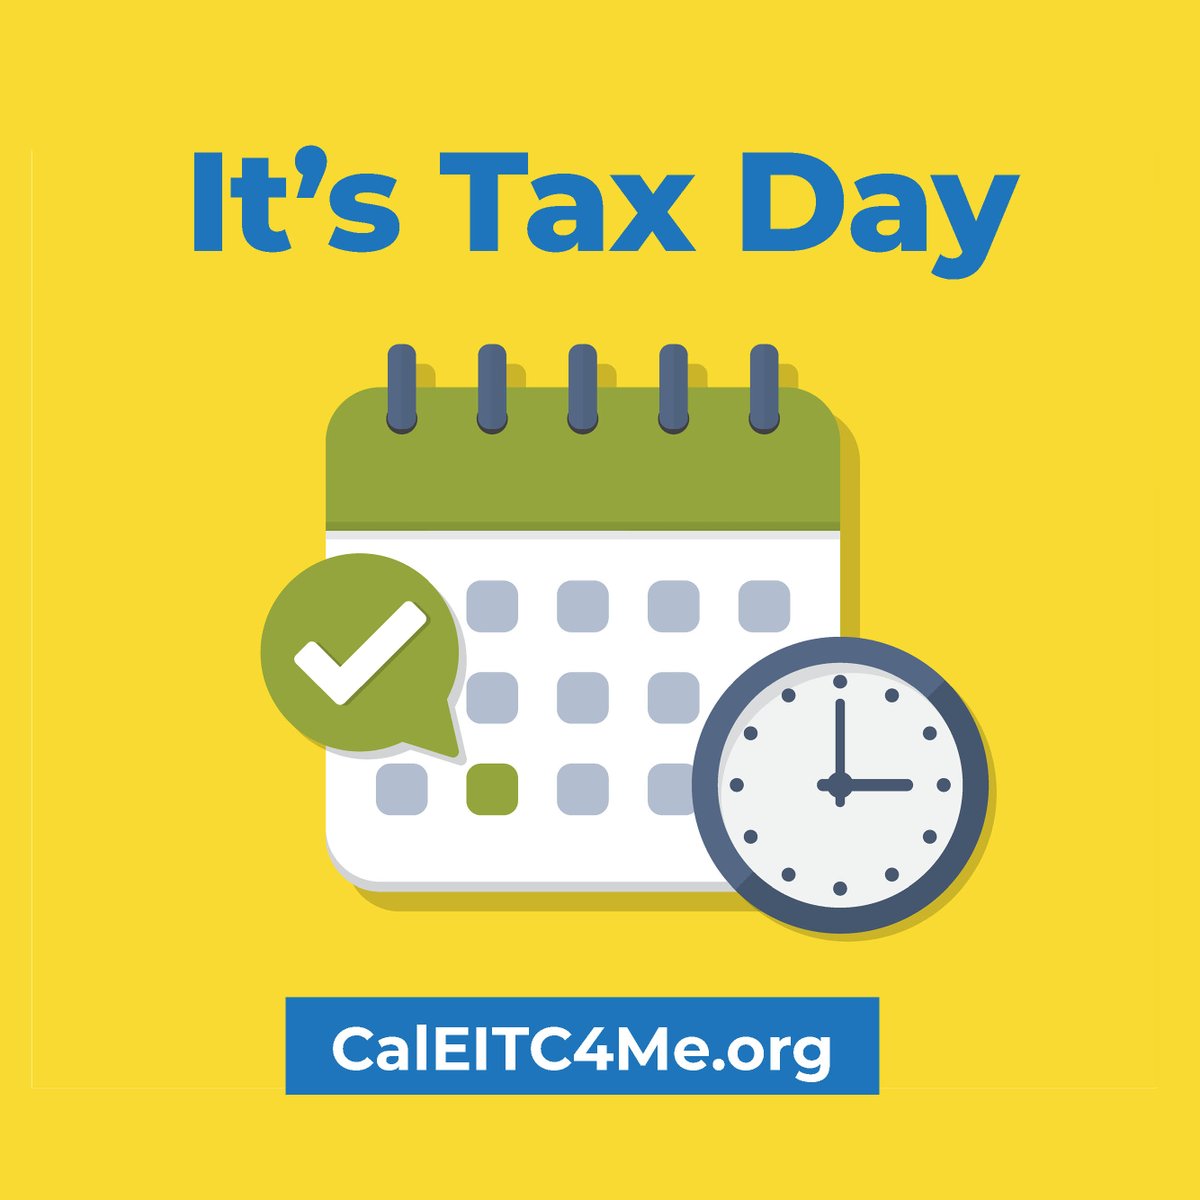 It’s Tax Day but it’s not too late to claim your credits! If you earned less than $30,950 last year, you may qualify for tax refunds. Learn more at CalEITC4Me.org/fileyourtaxes